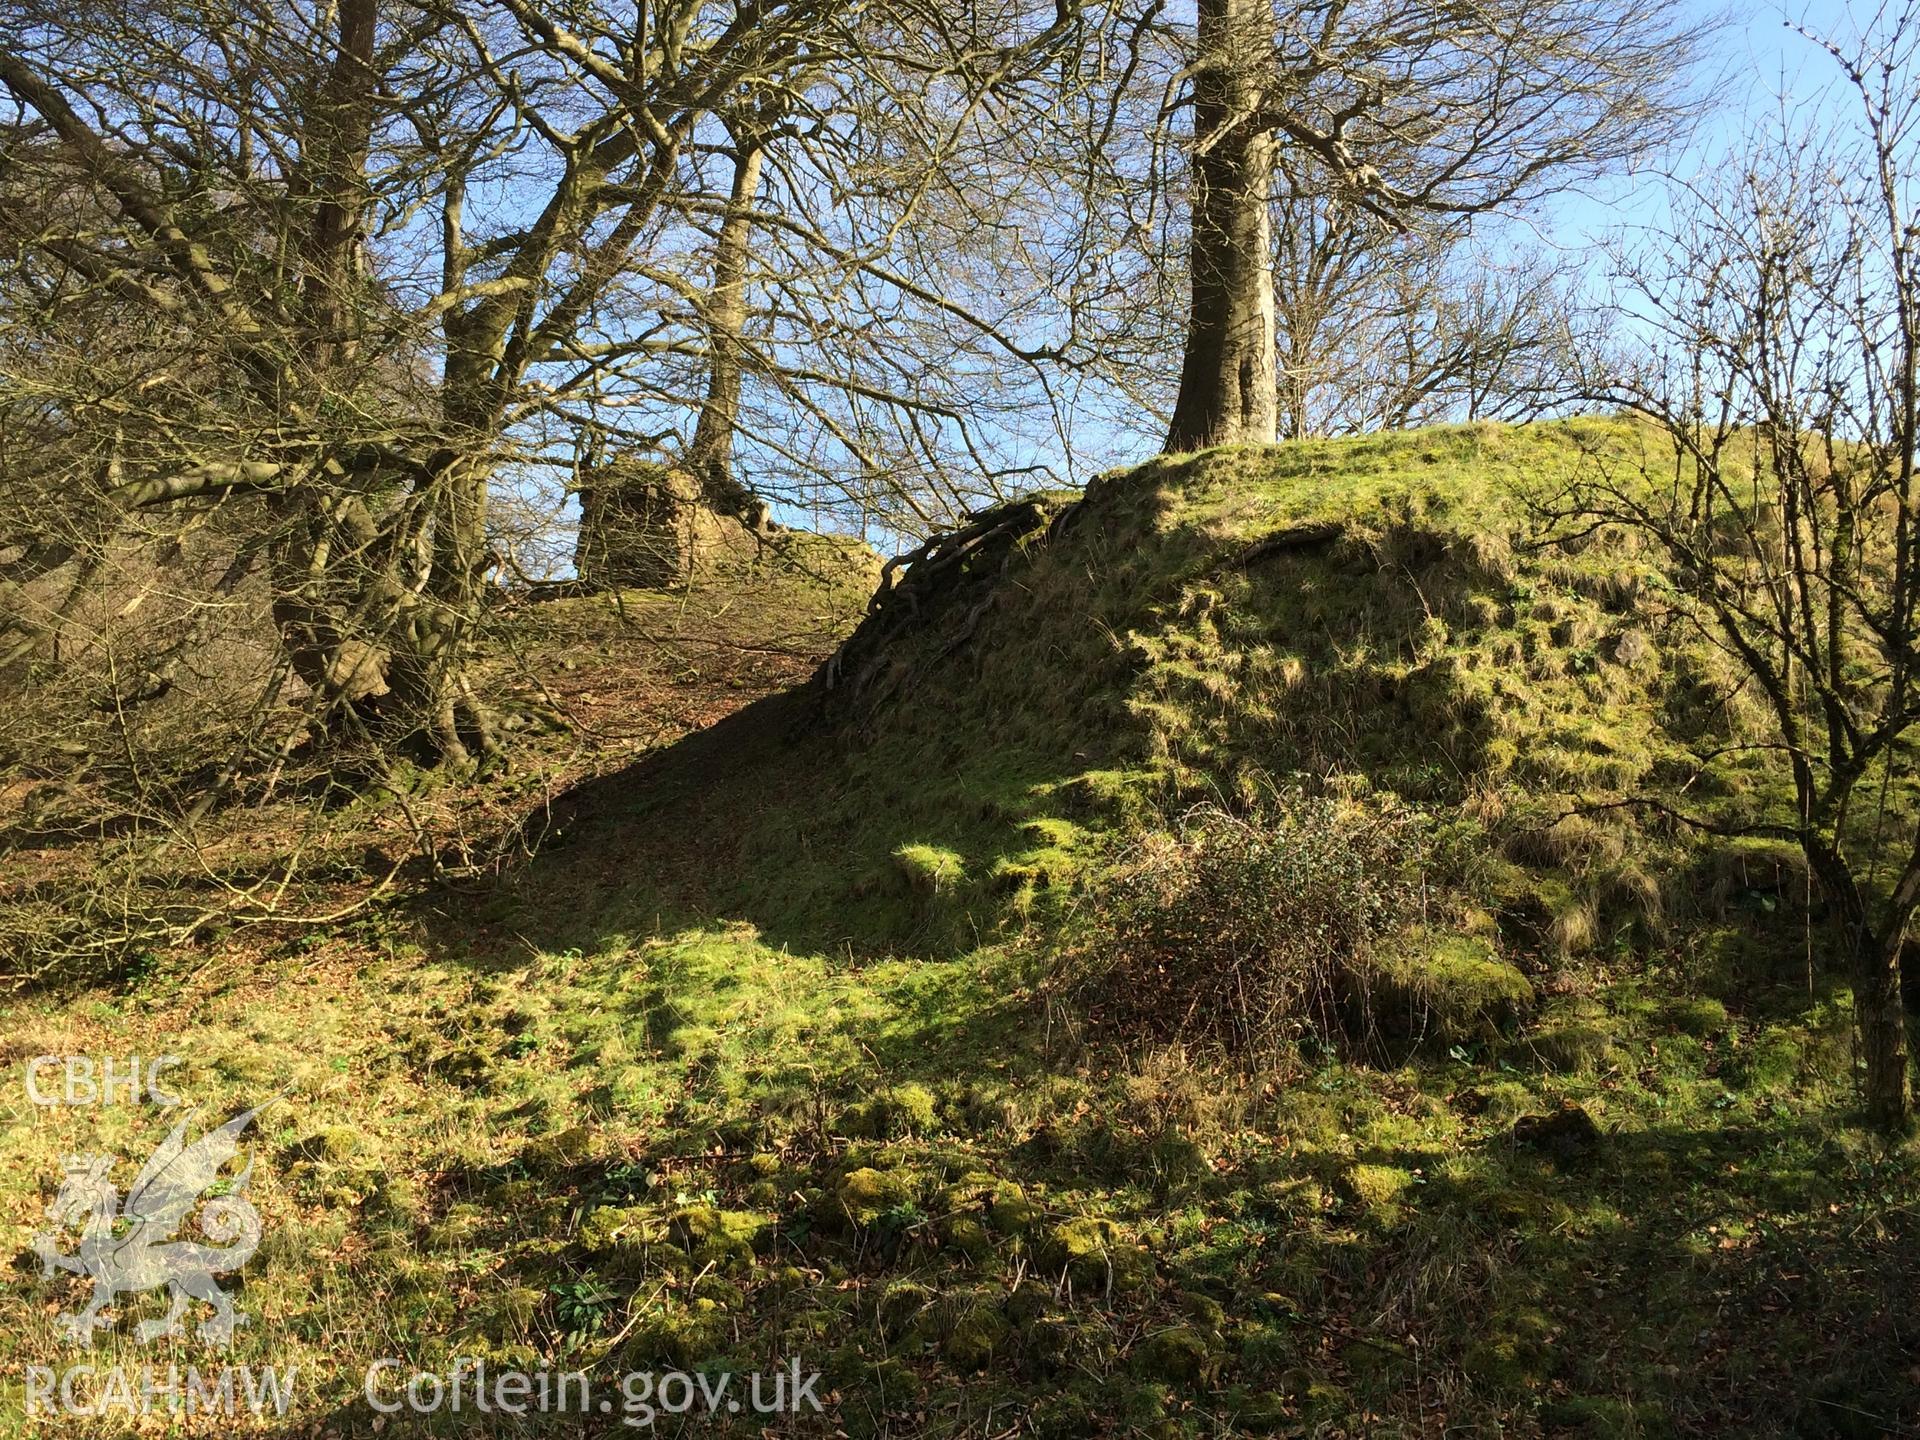 Colour photo showing Castell Meredydd, produced by  Paul R. Davis, 2nd February 2017.